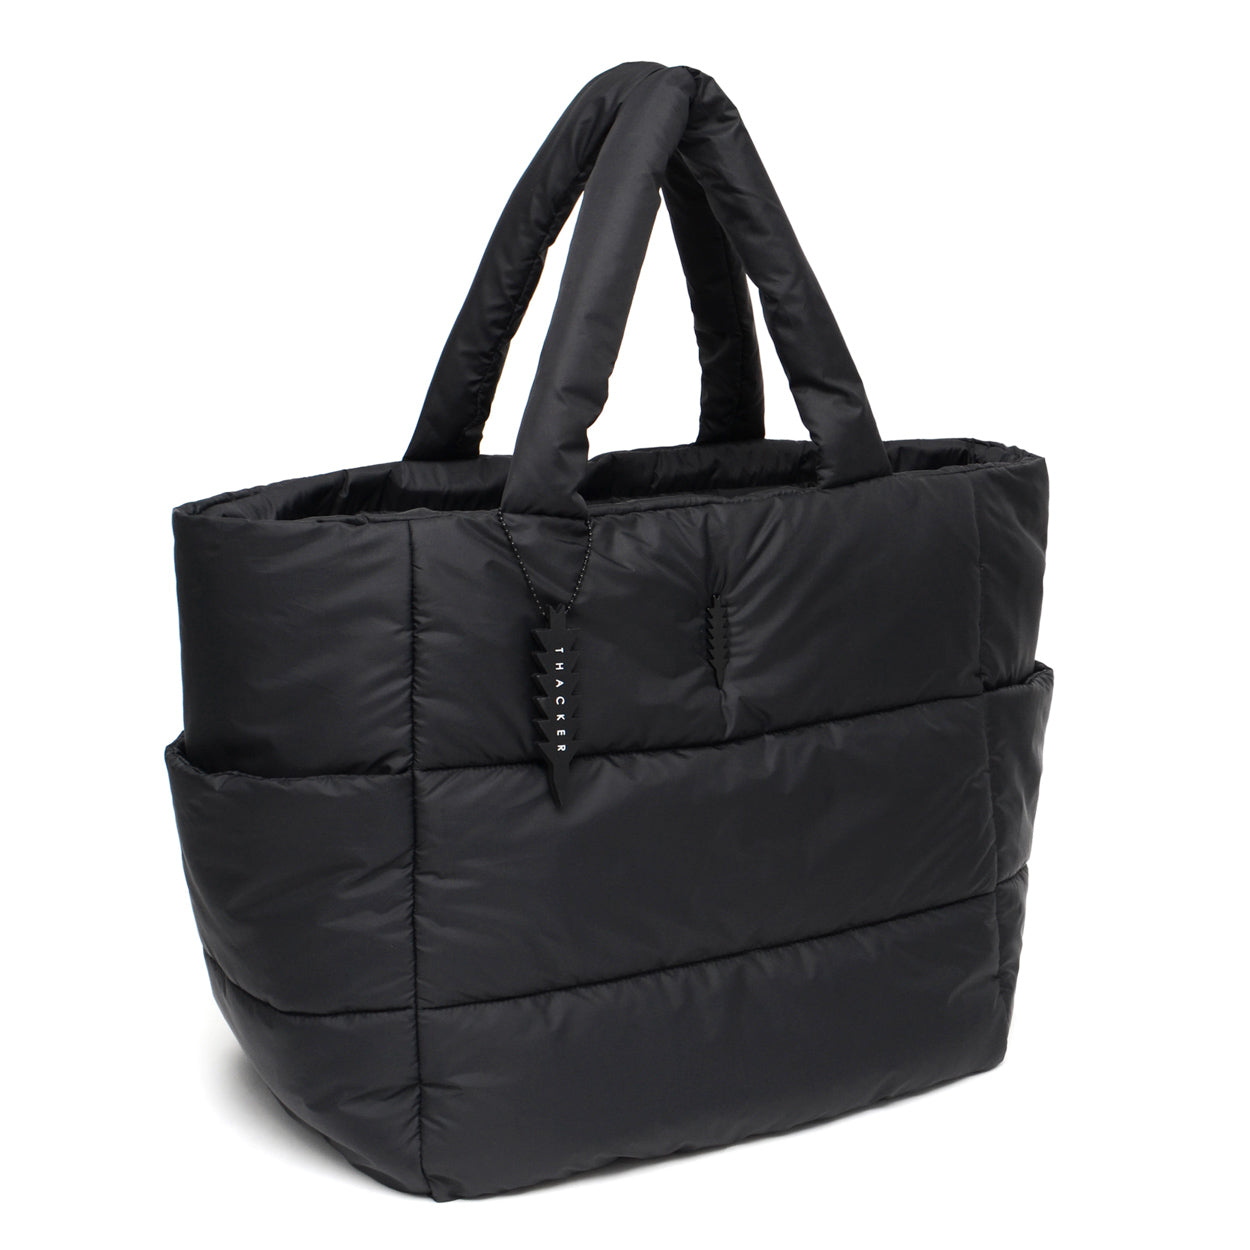 thacker Quinn Puffy Quilted Duffle Bag in Black